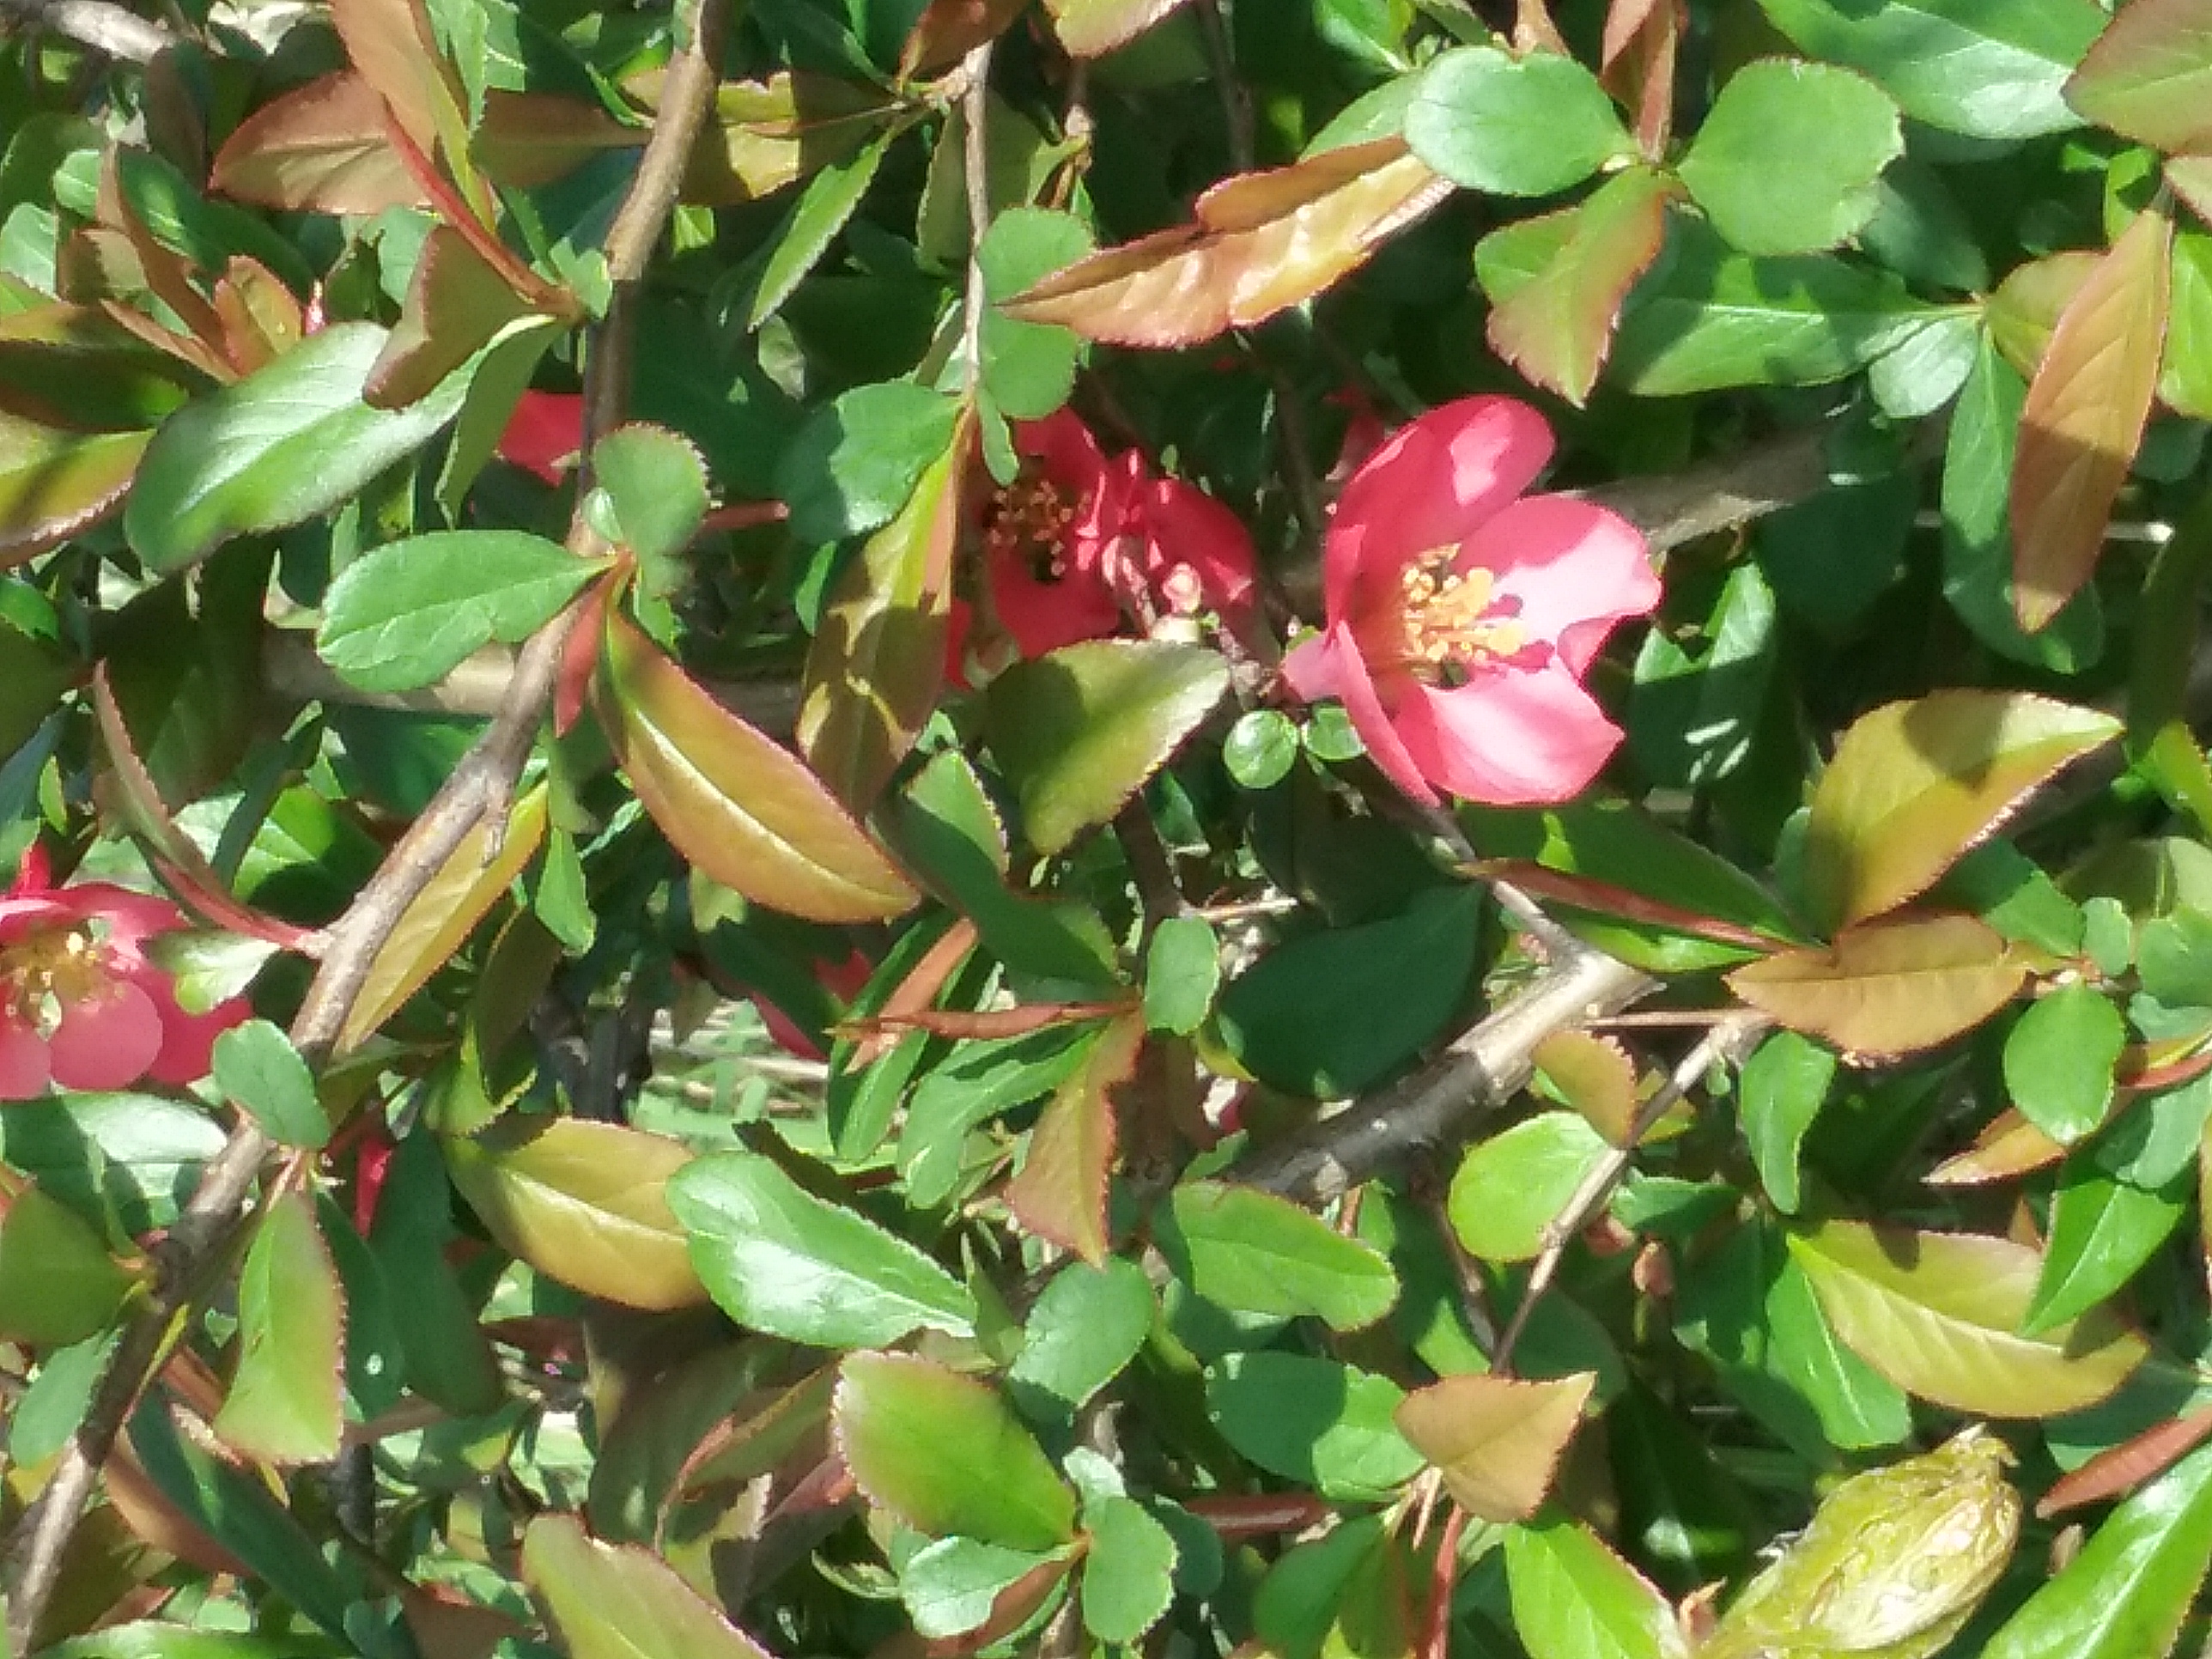 mystery plant likely a flowering quince - indiana yard and garden